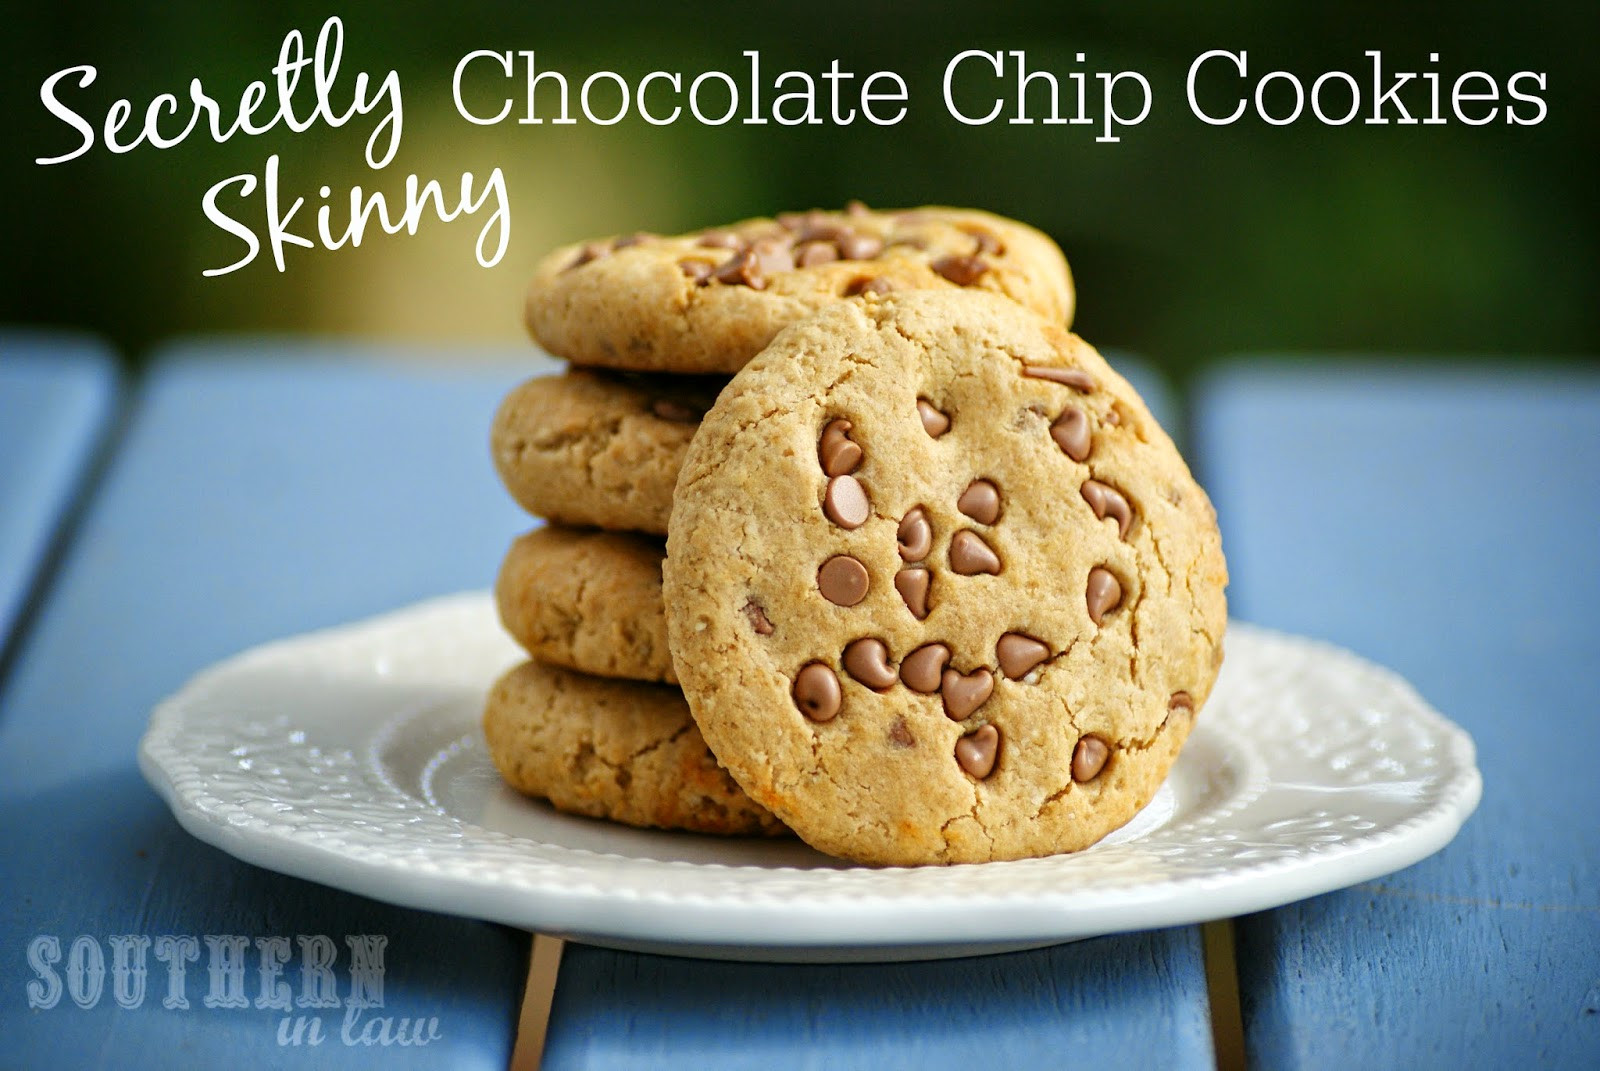 Healthy Cookies Recipe Low Calorie
 Southern In Law Recipe Secretly Skinny Chocolate Chip